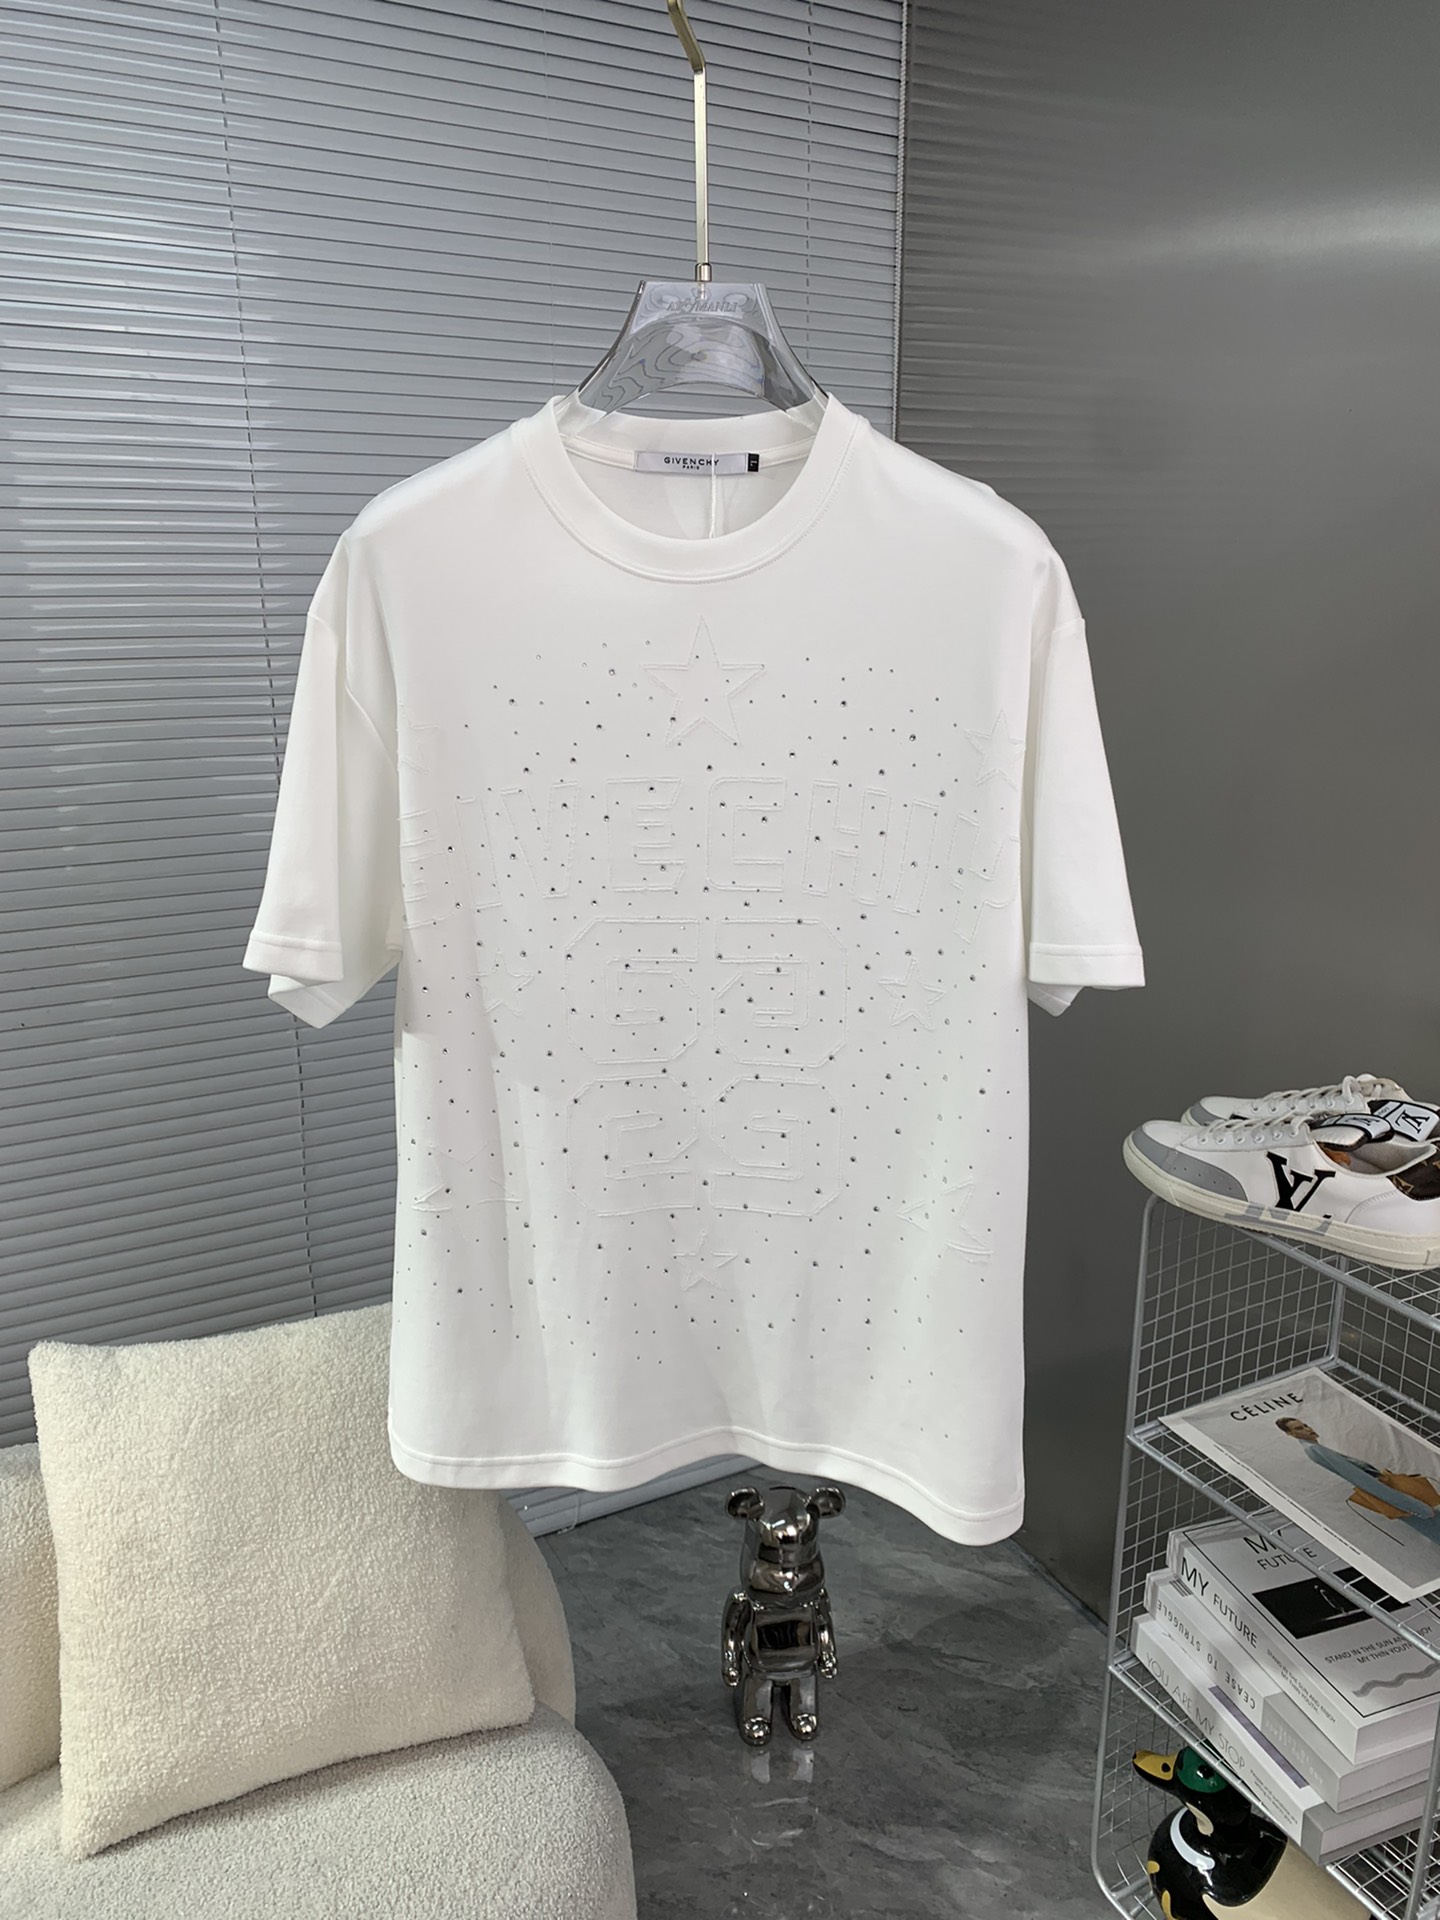 Givenchy Clothing T-Shirt Cotton Mercerized Spring/Summer Collection Short Sleeve